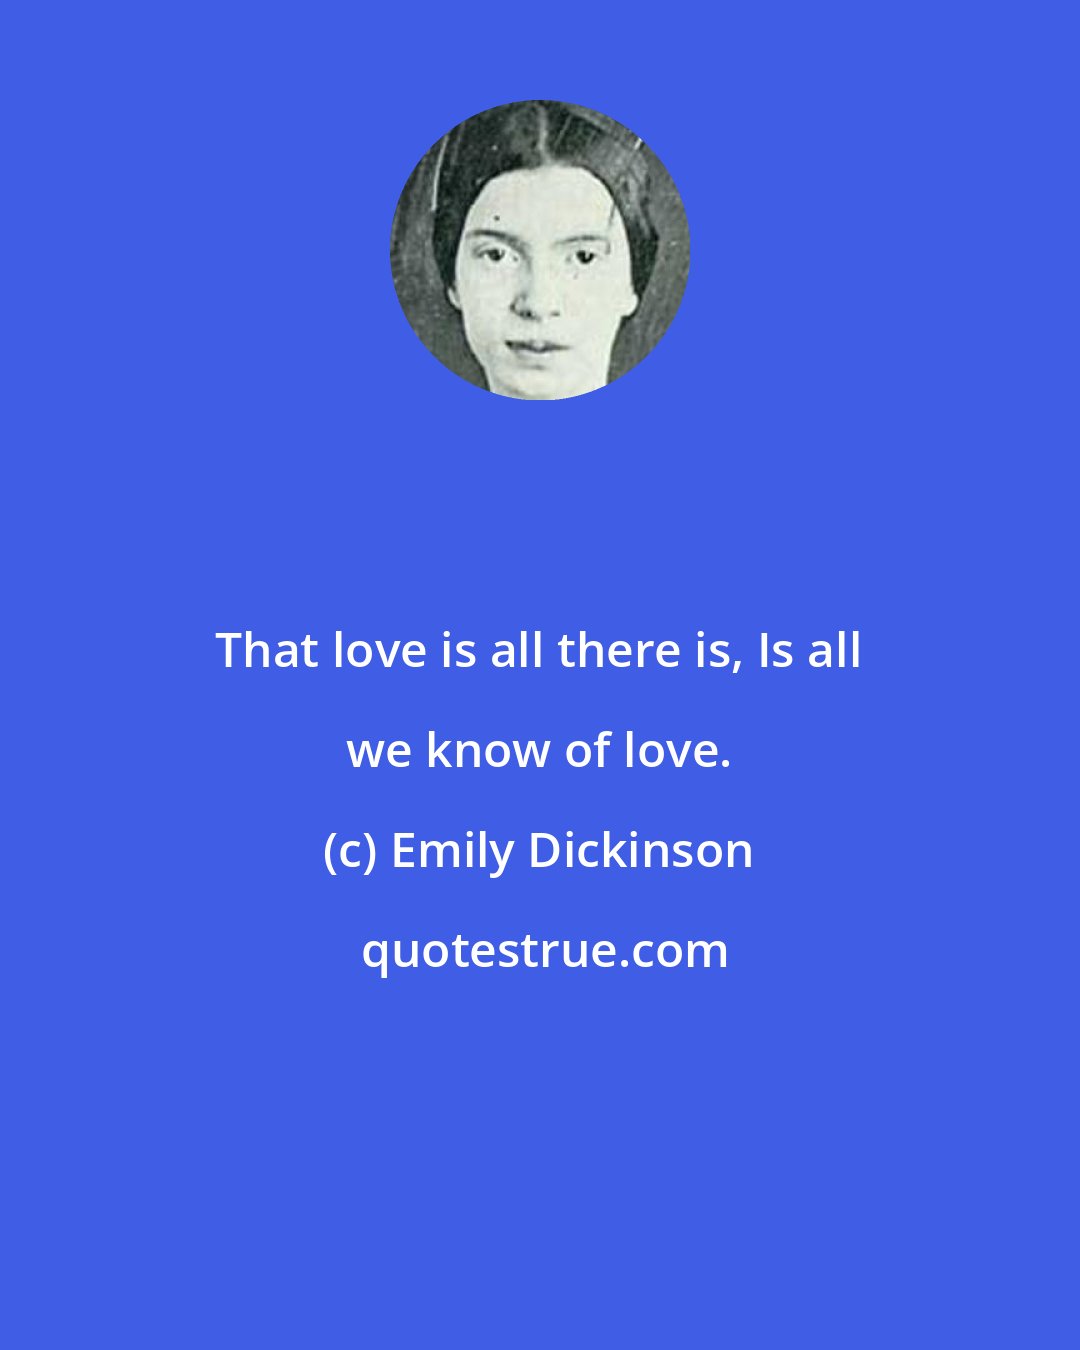 Emily Dickinson: That love is all there is, Is all we know of love.